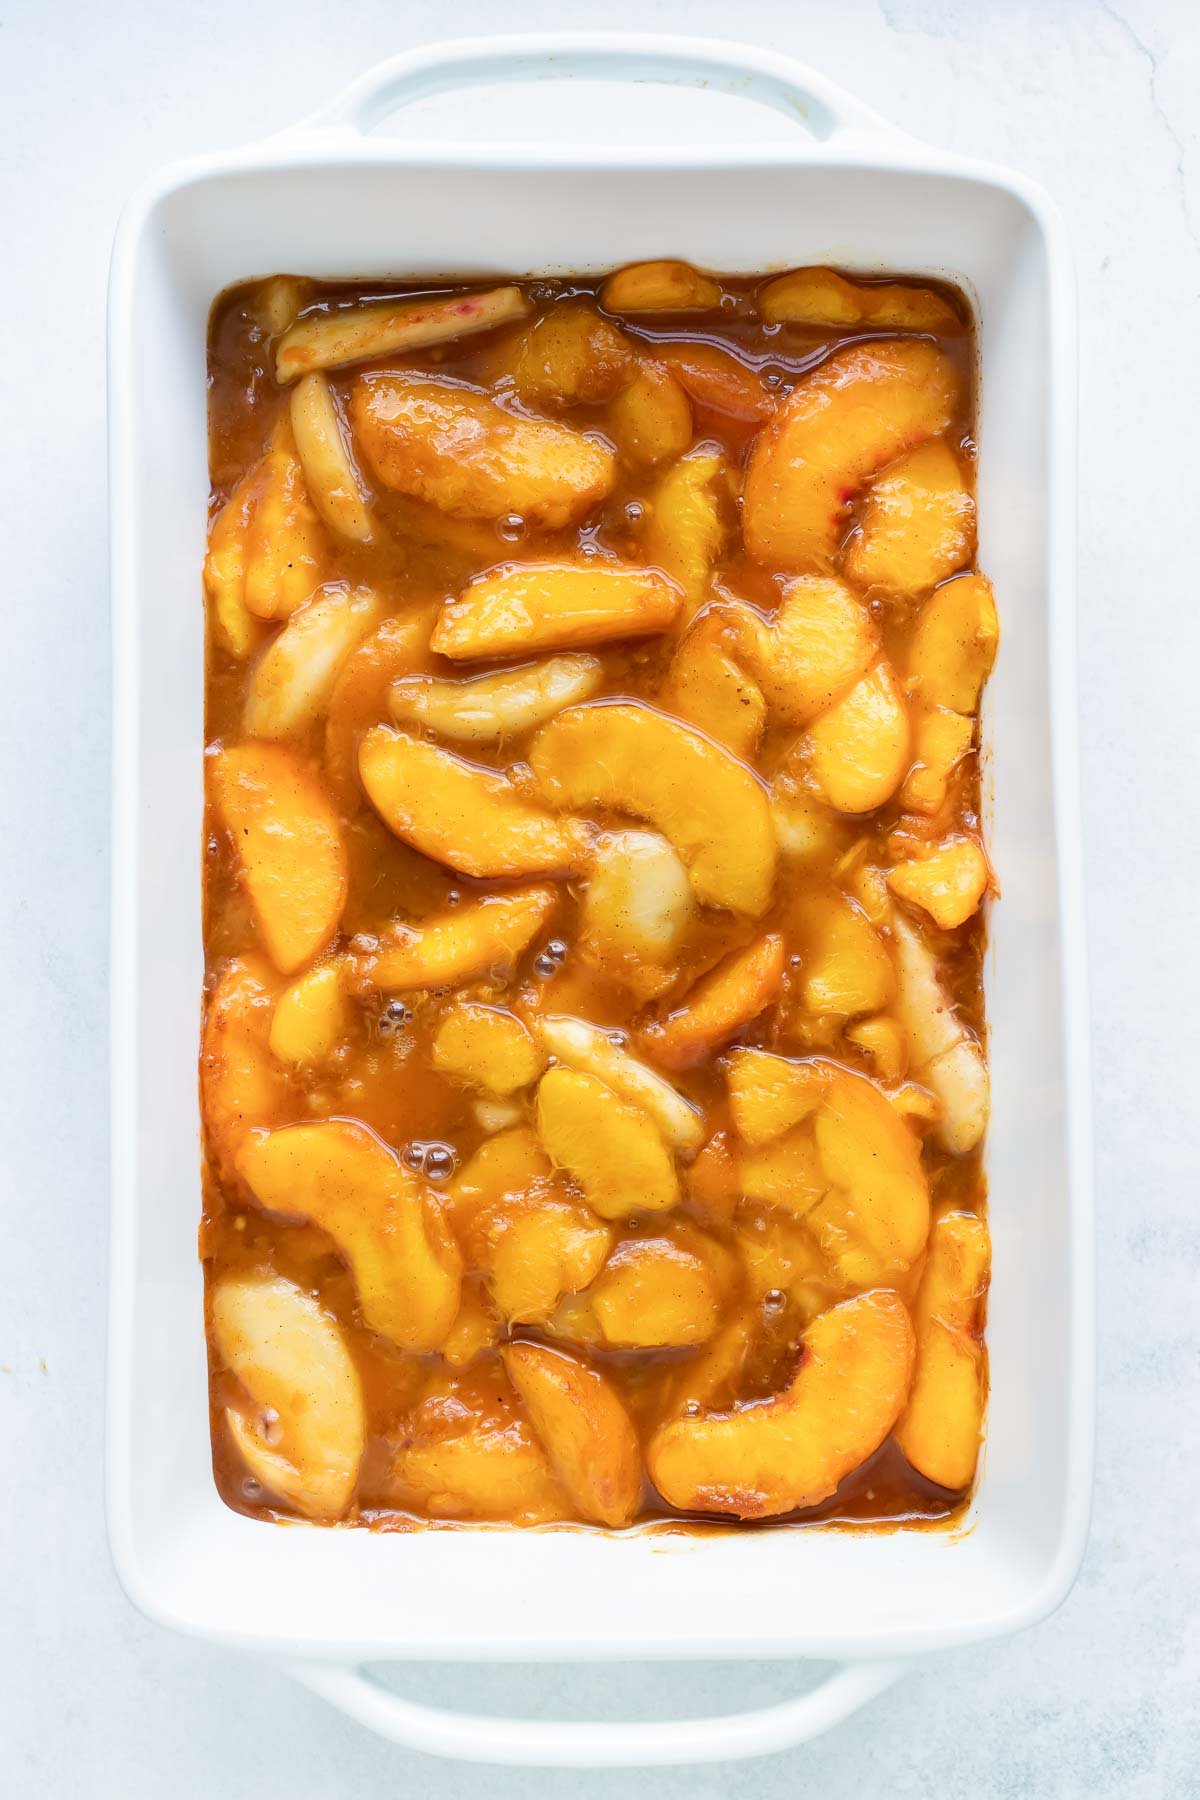 The peach filling is spread in the pan.